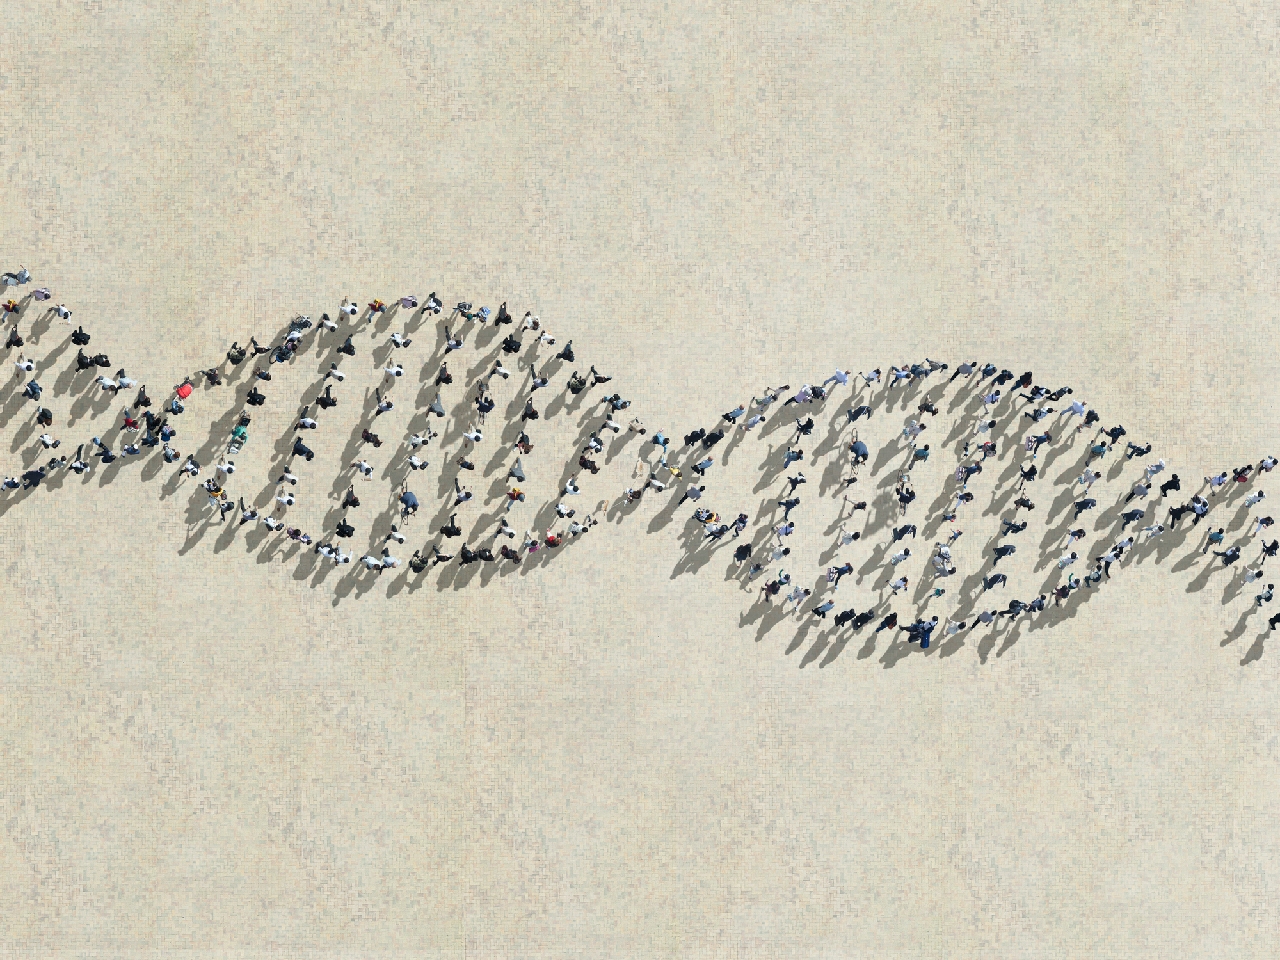 DNA strand made out of walking people